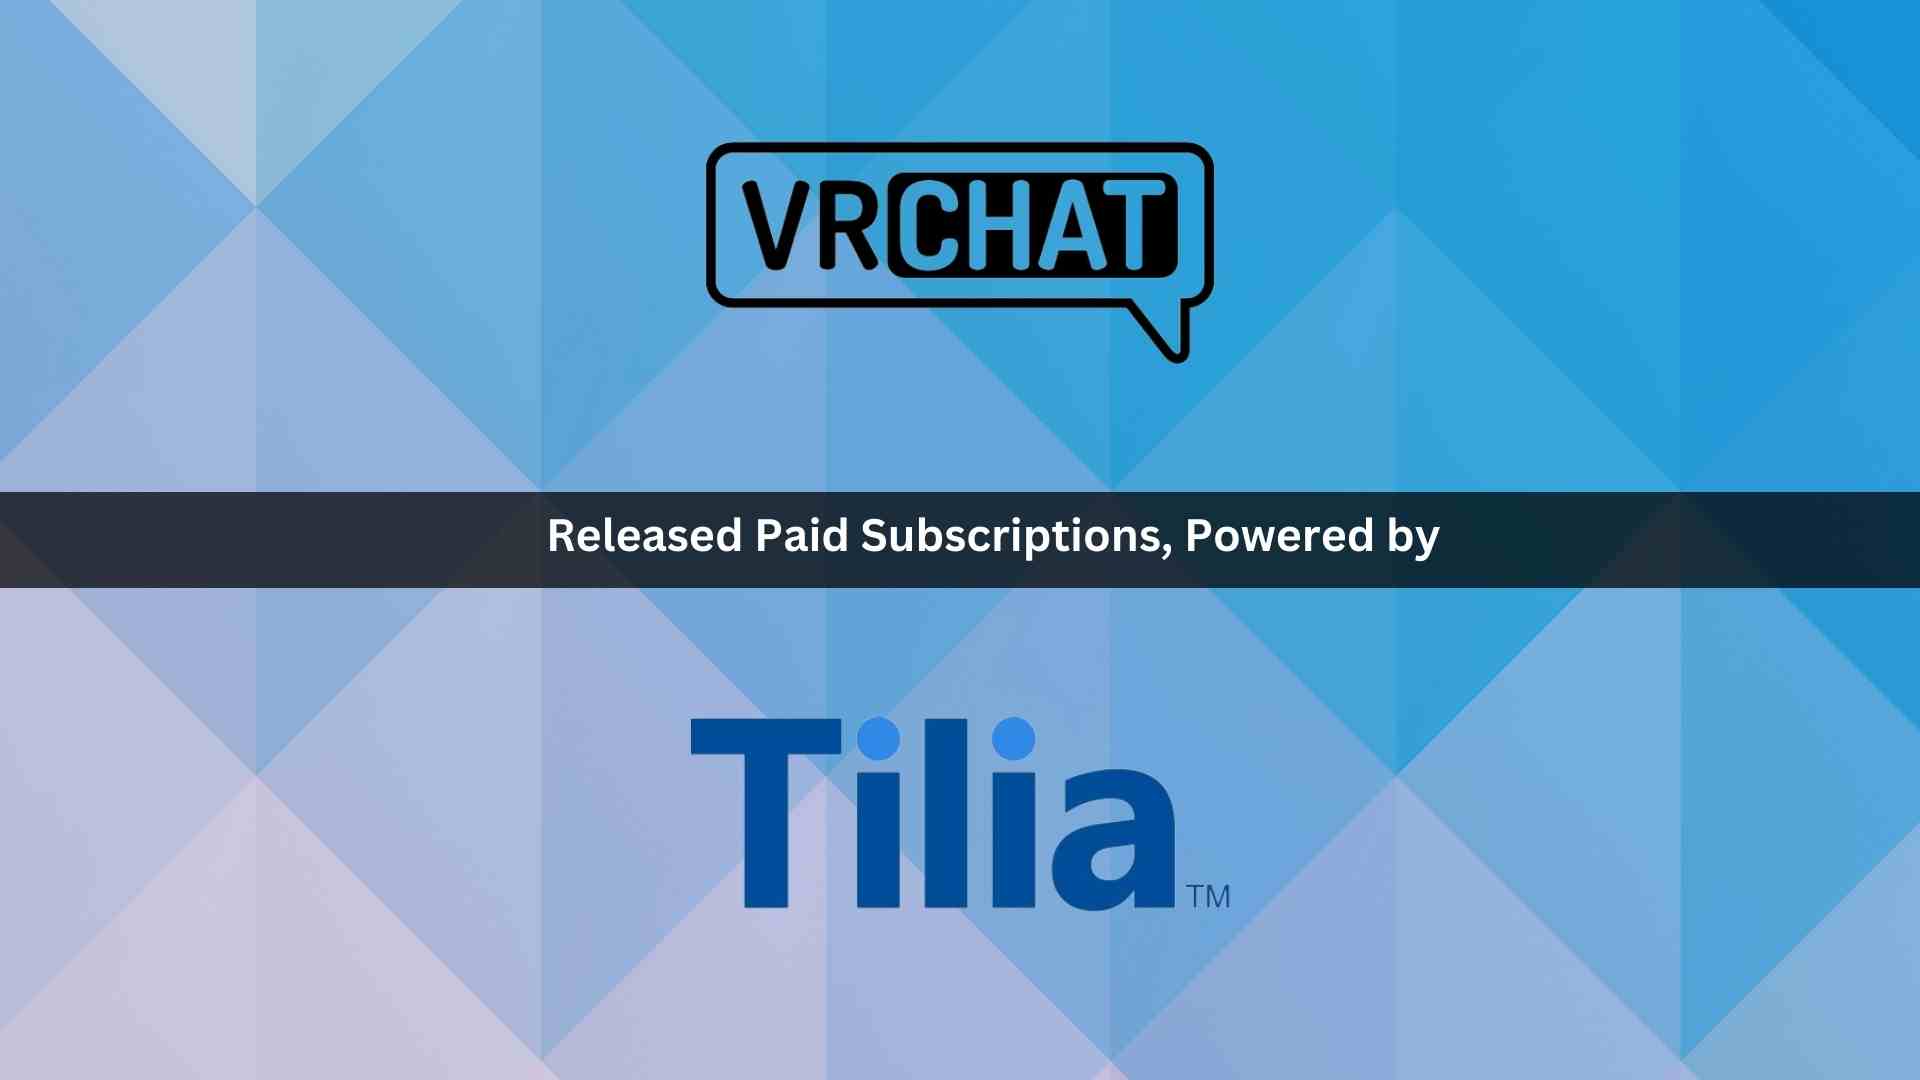 VRChat Launches Creator Economy via Paid Subscriptions